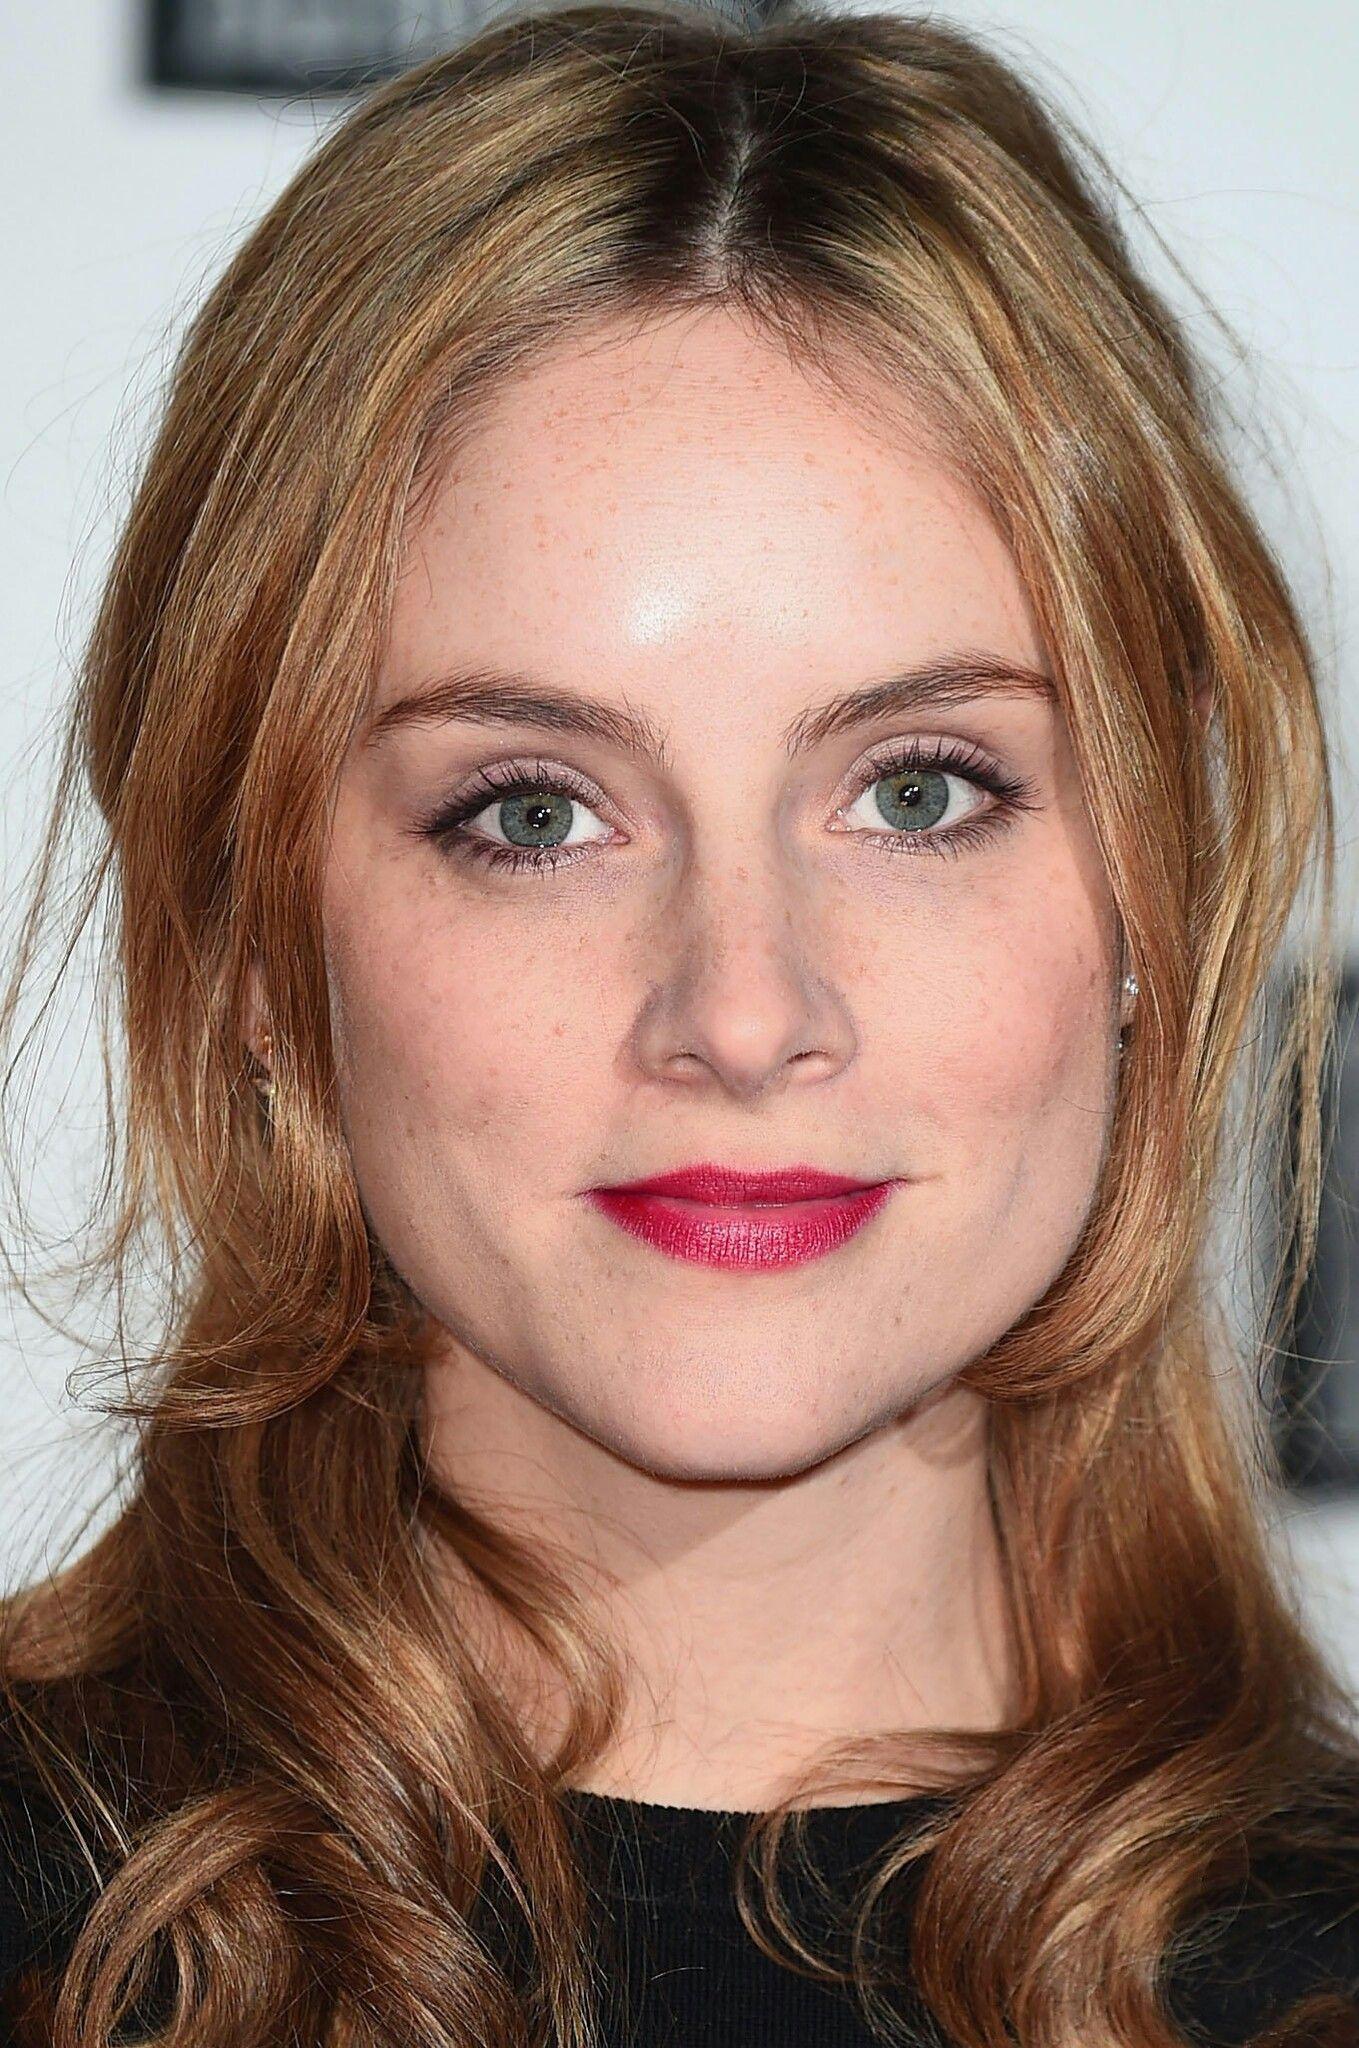 Sophie Rundle. English Actress. Born in Bournemouth, Dorset, 1988